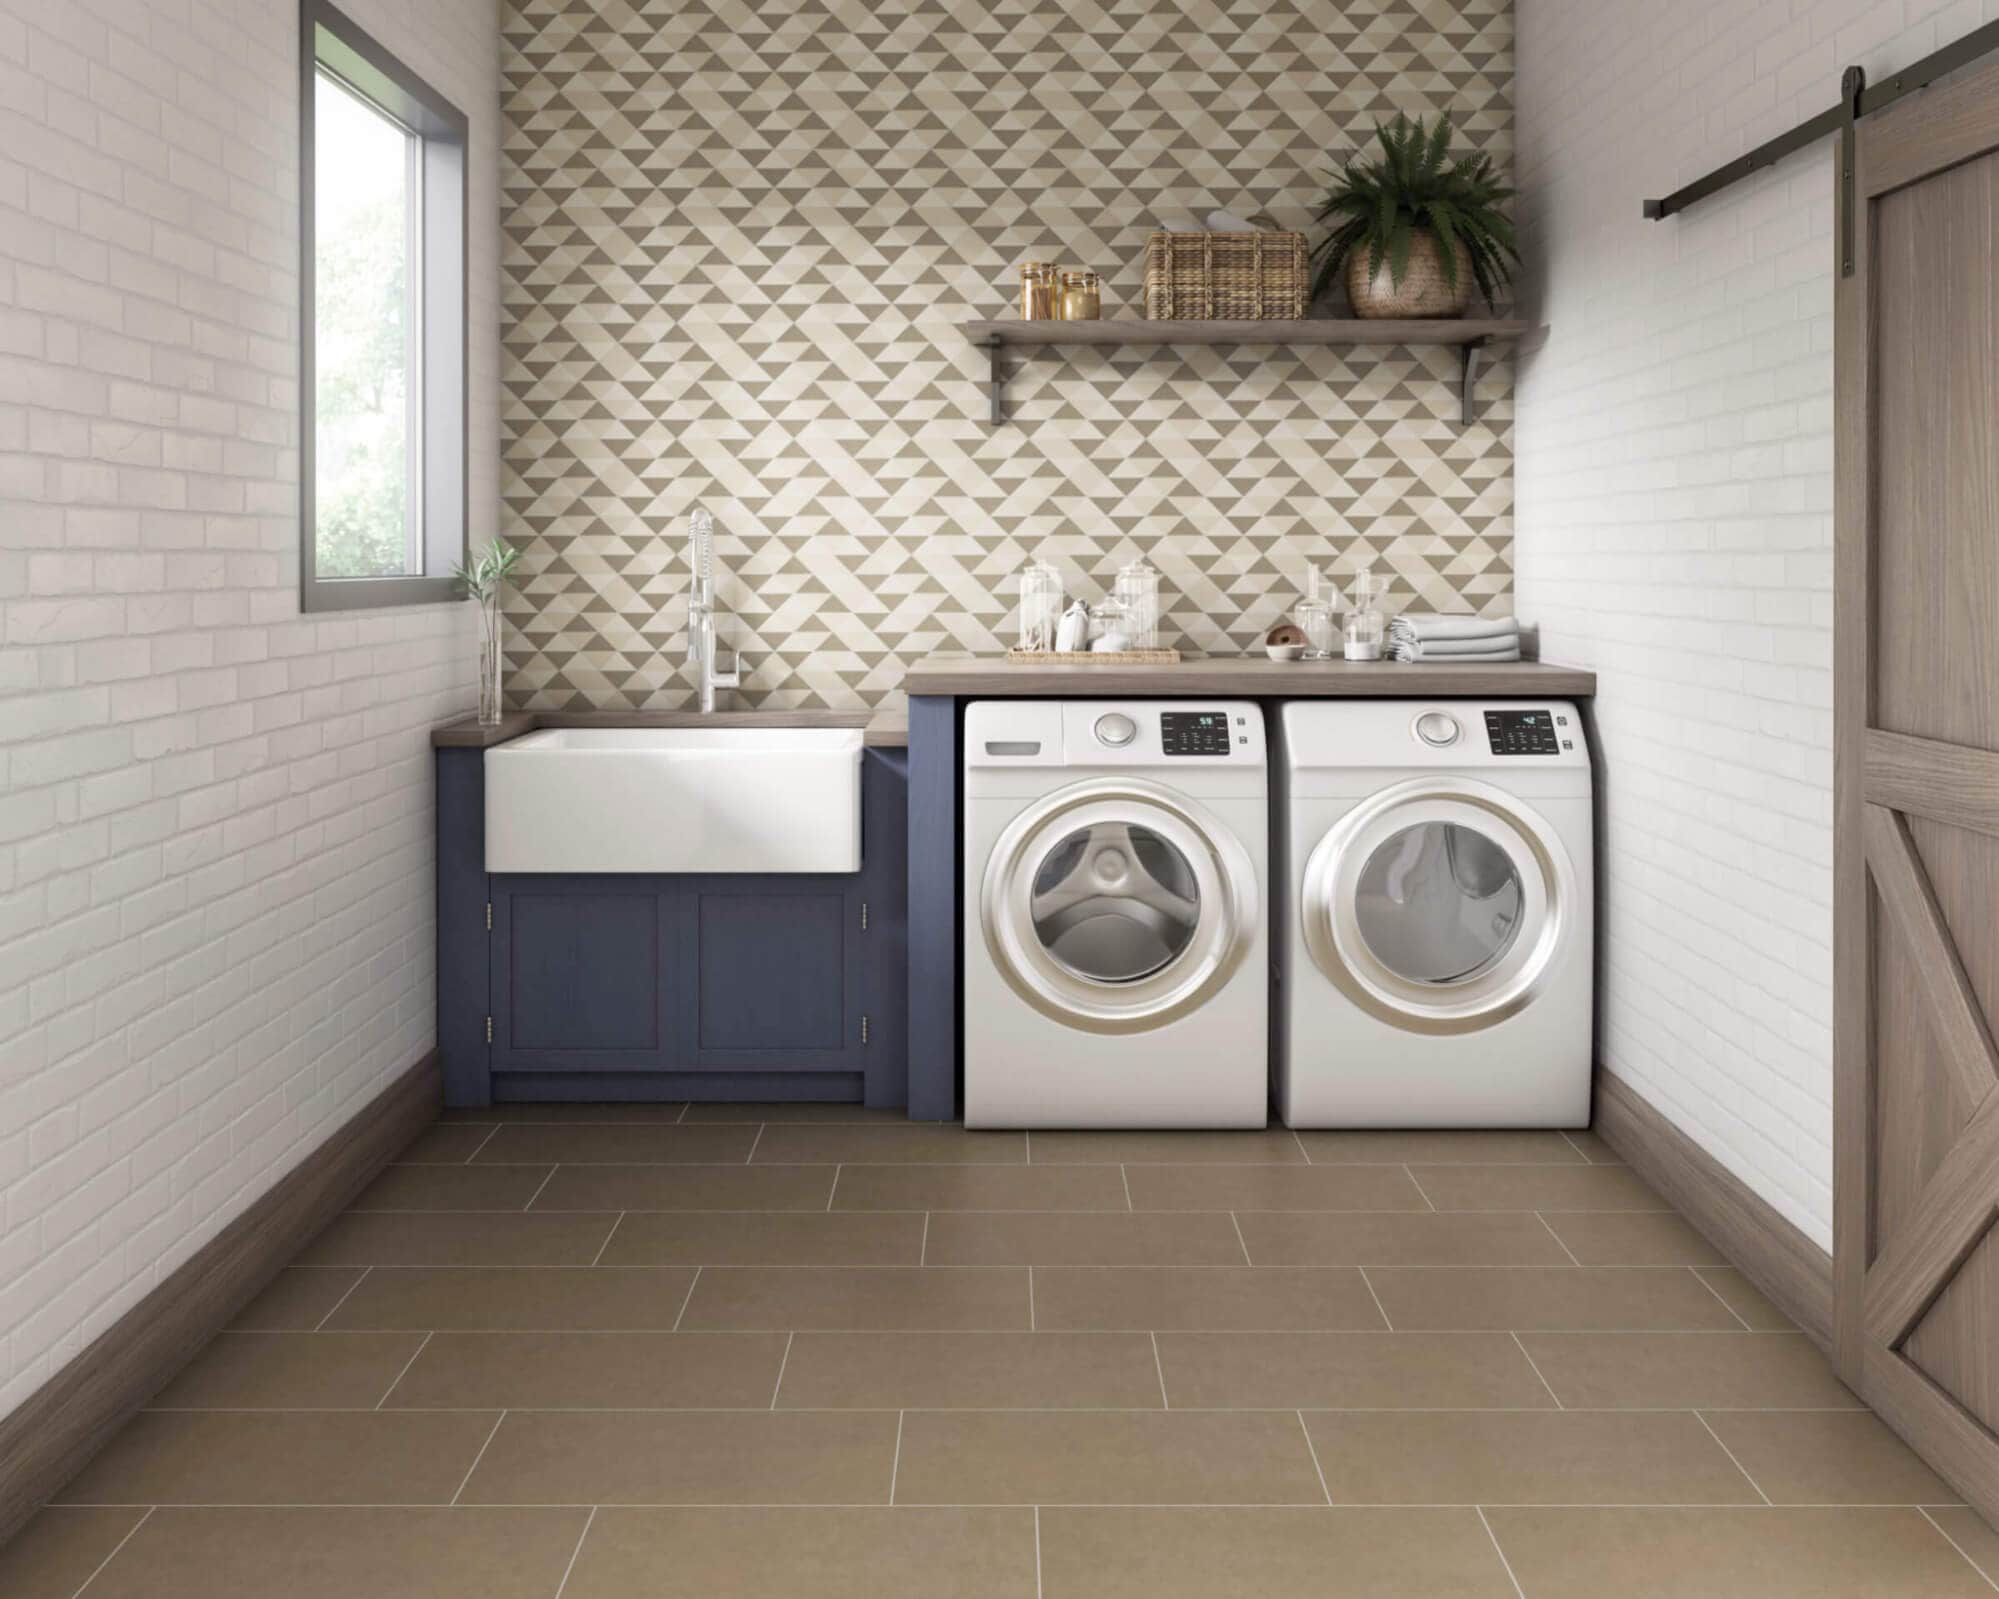 Laundry room with subway floor tile pattern